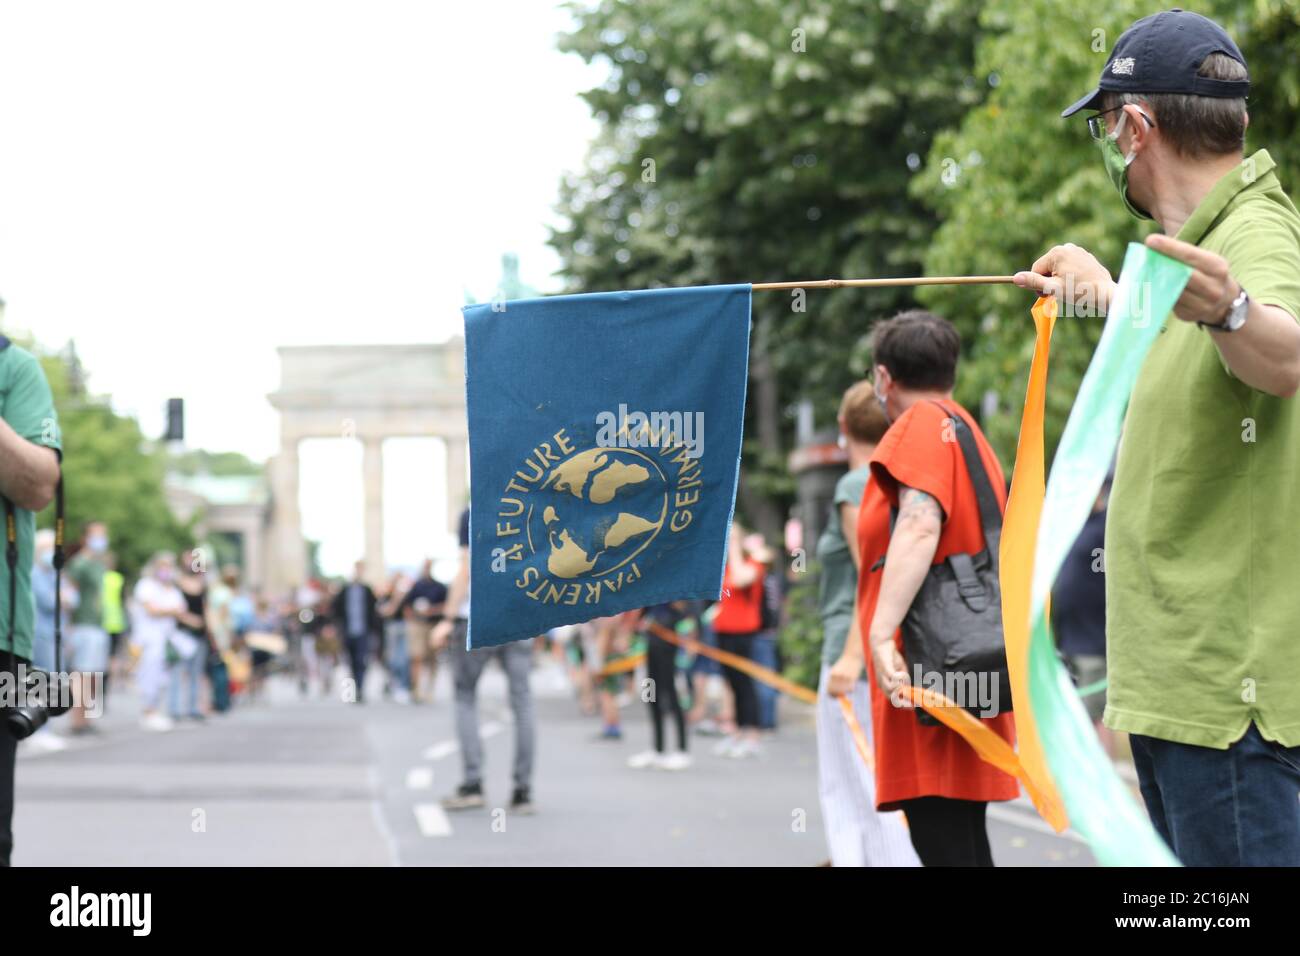 06/14/2020, Berlin, Germany, The alliance "Unteilbar" (Indivisible), demonstrates against social injustice and racism with a nine kilometer long human chain from the Brandenburger Tor to Neukölln. Stock Photo